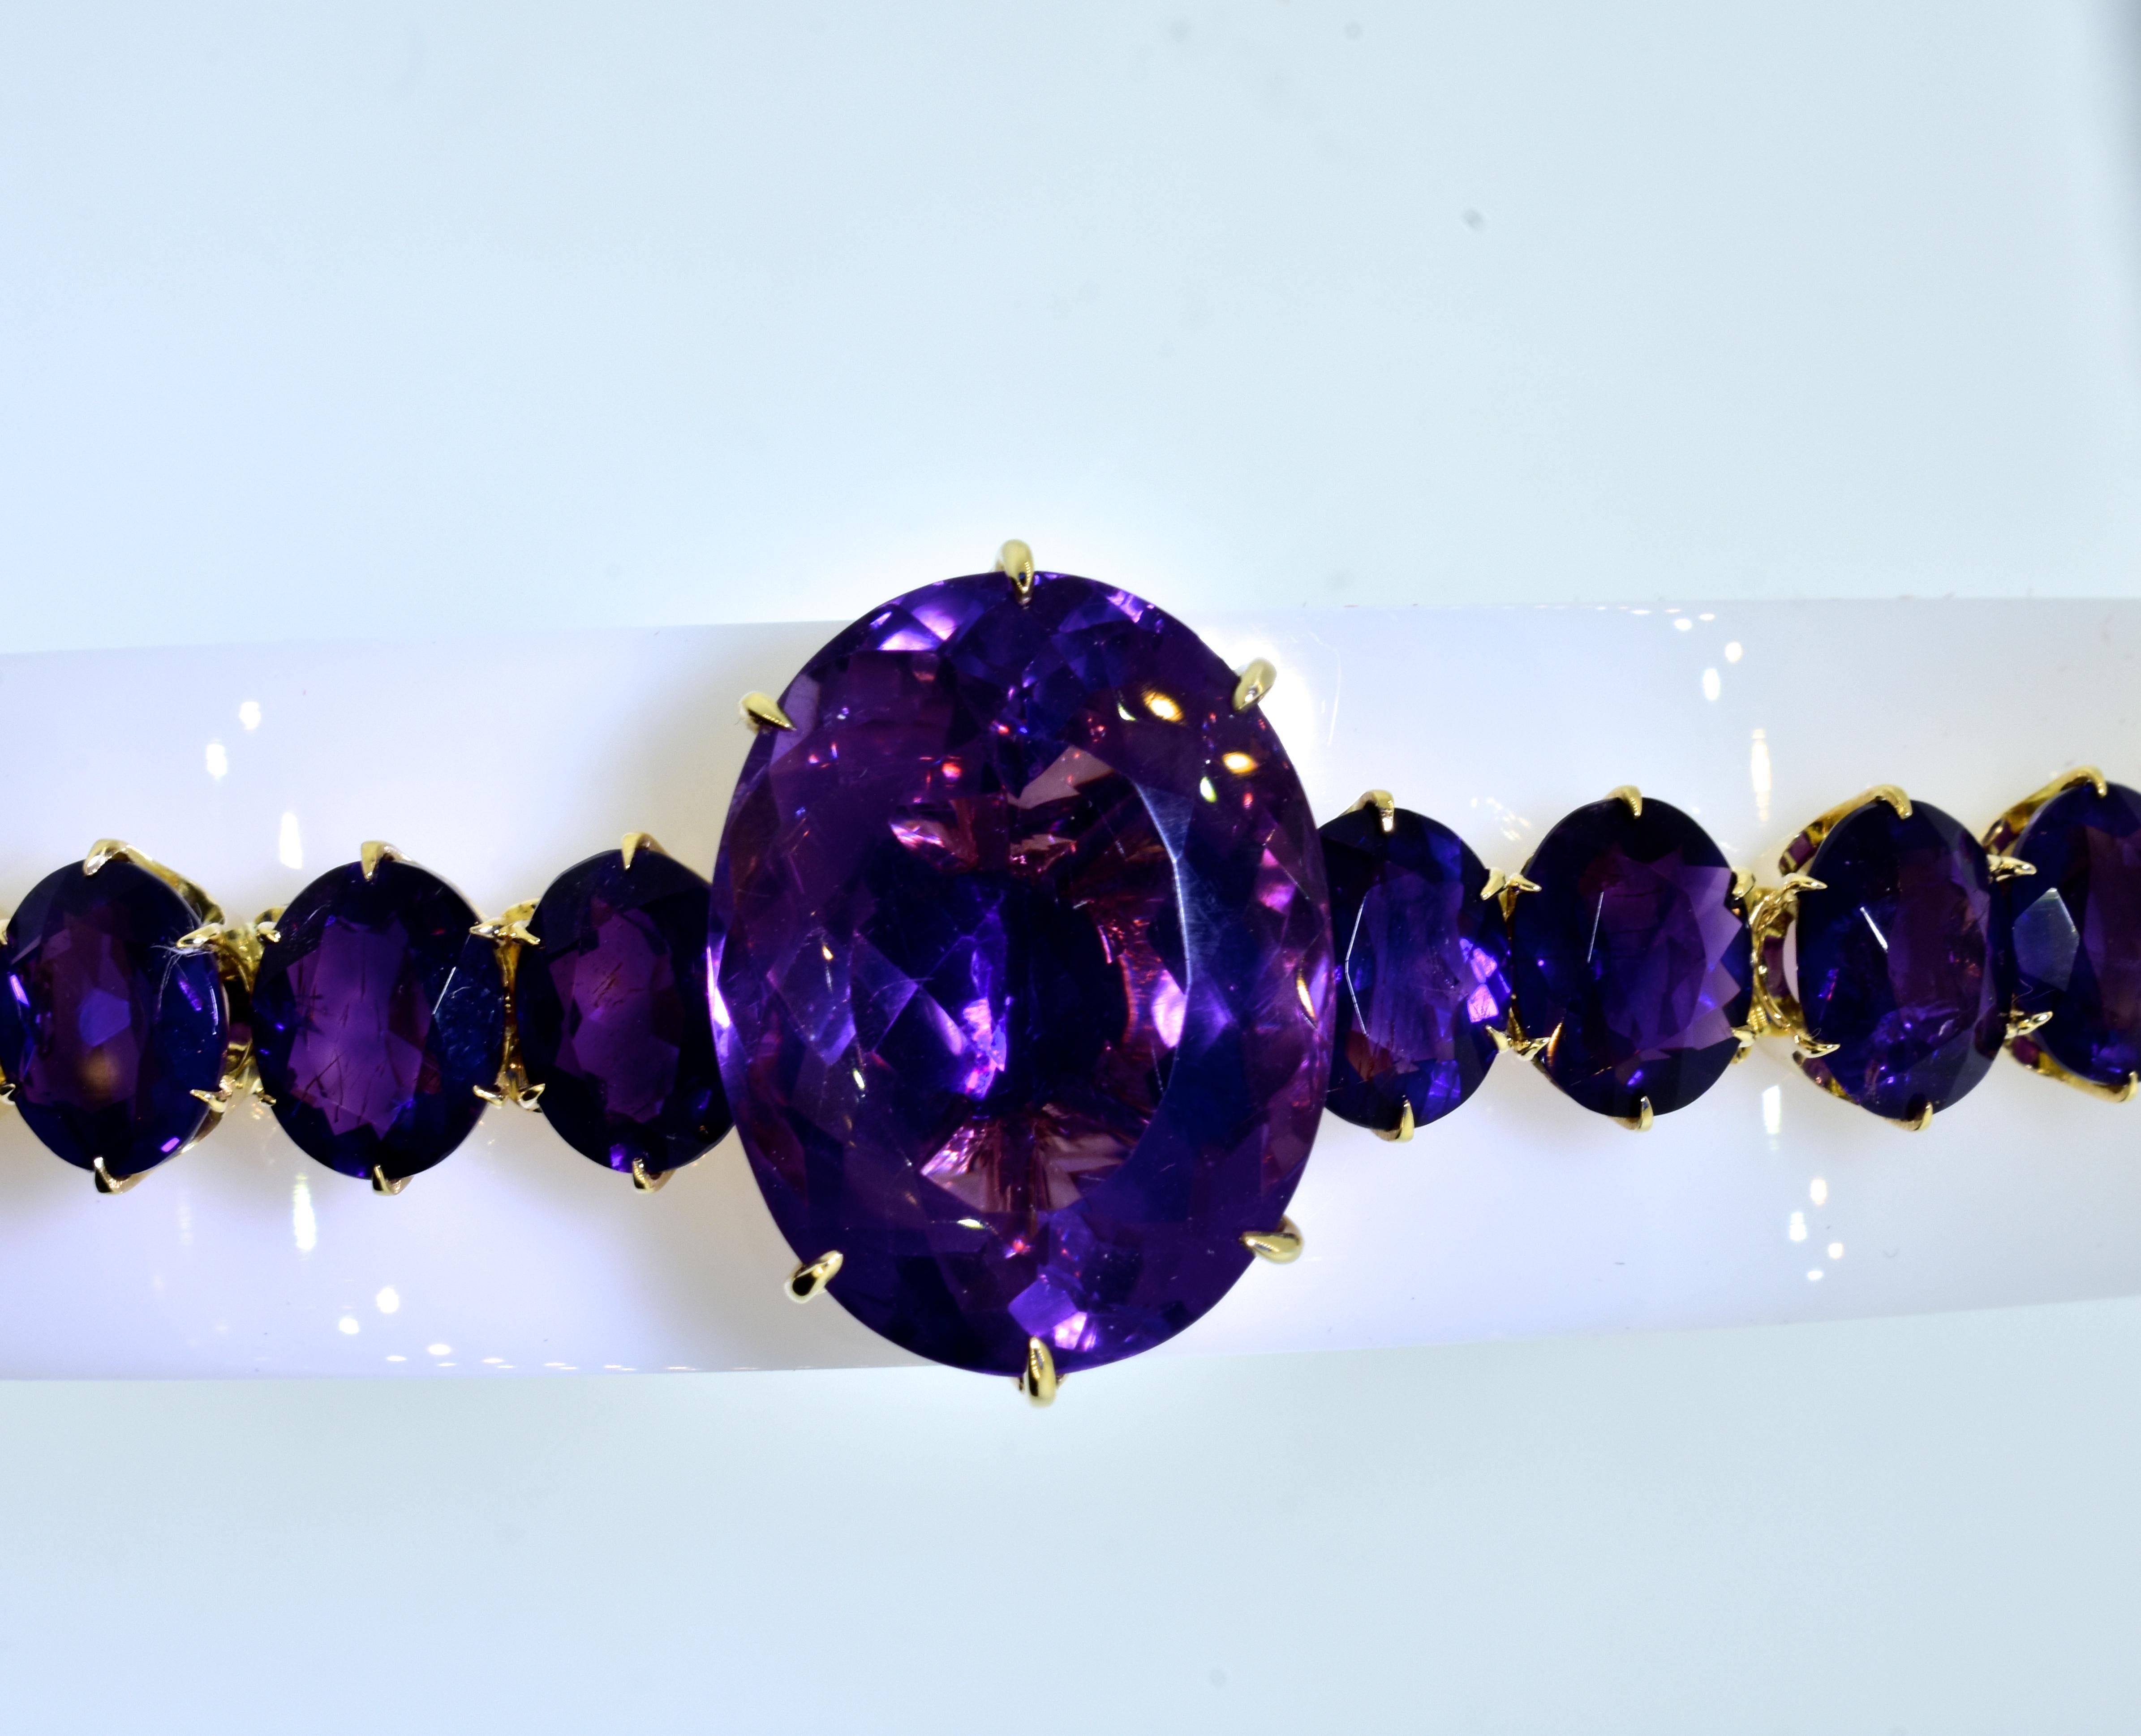 19th Century antique gold bracelet possessing finely matched purple amethysts.  The total weight of the very fine amethysts is estimated to be 150 cts.  The large center stone is set with elaborate prongs and gallery hand work, it is estimated to